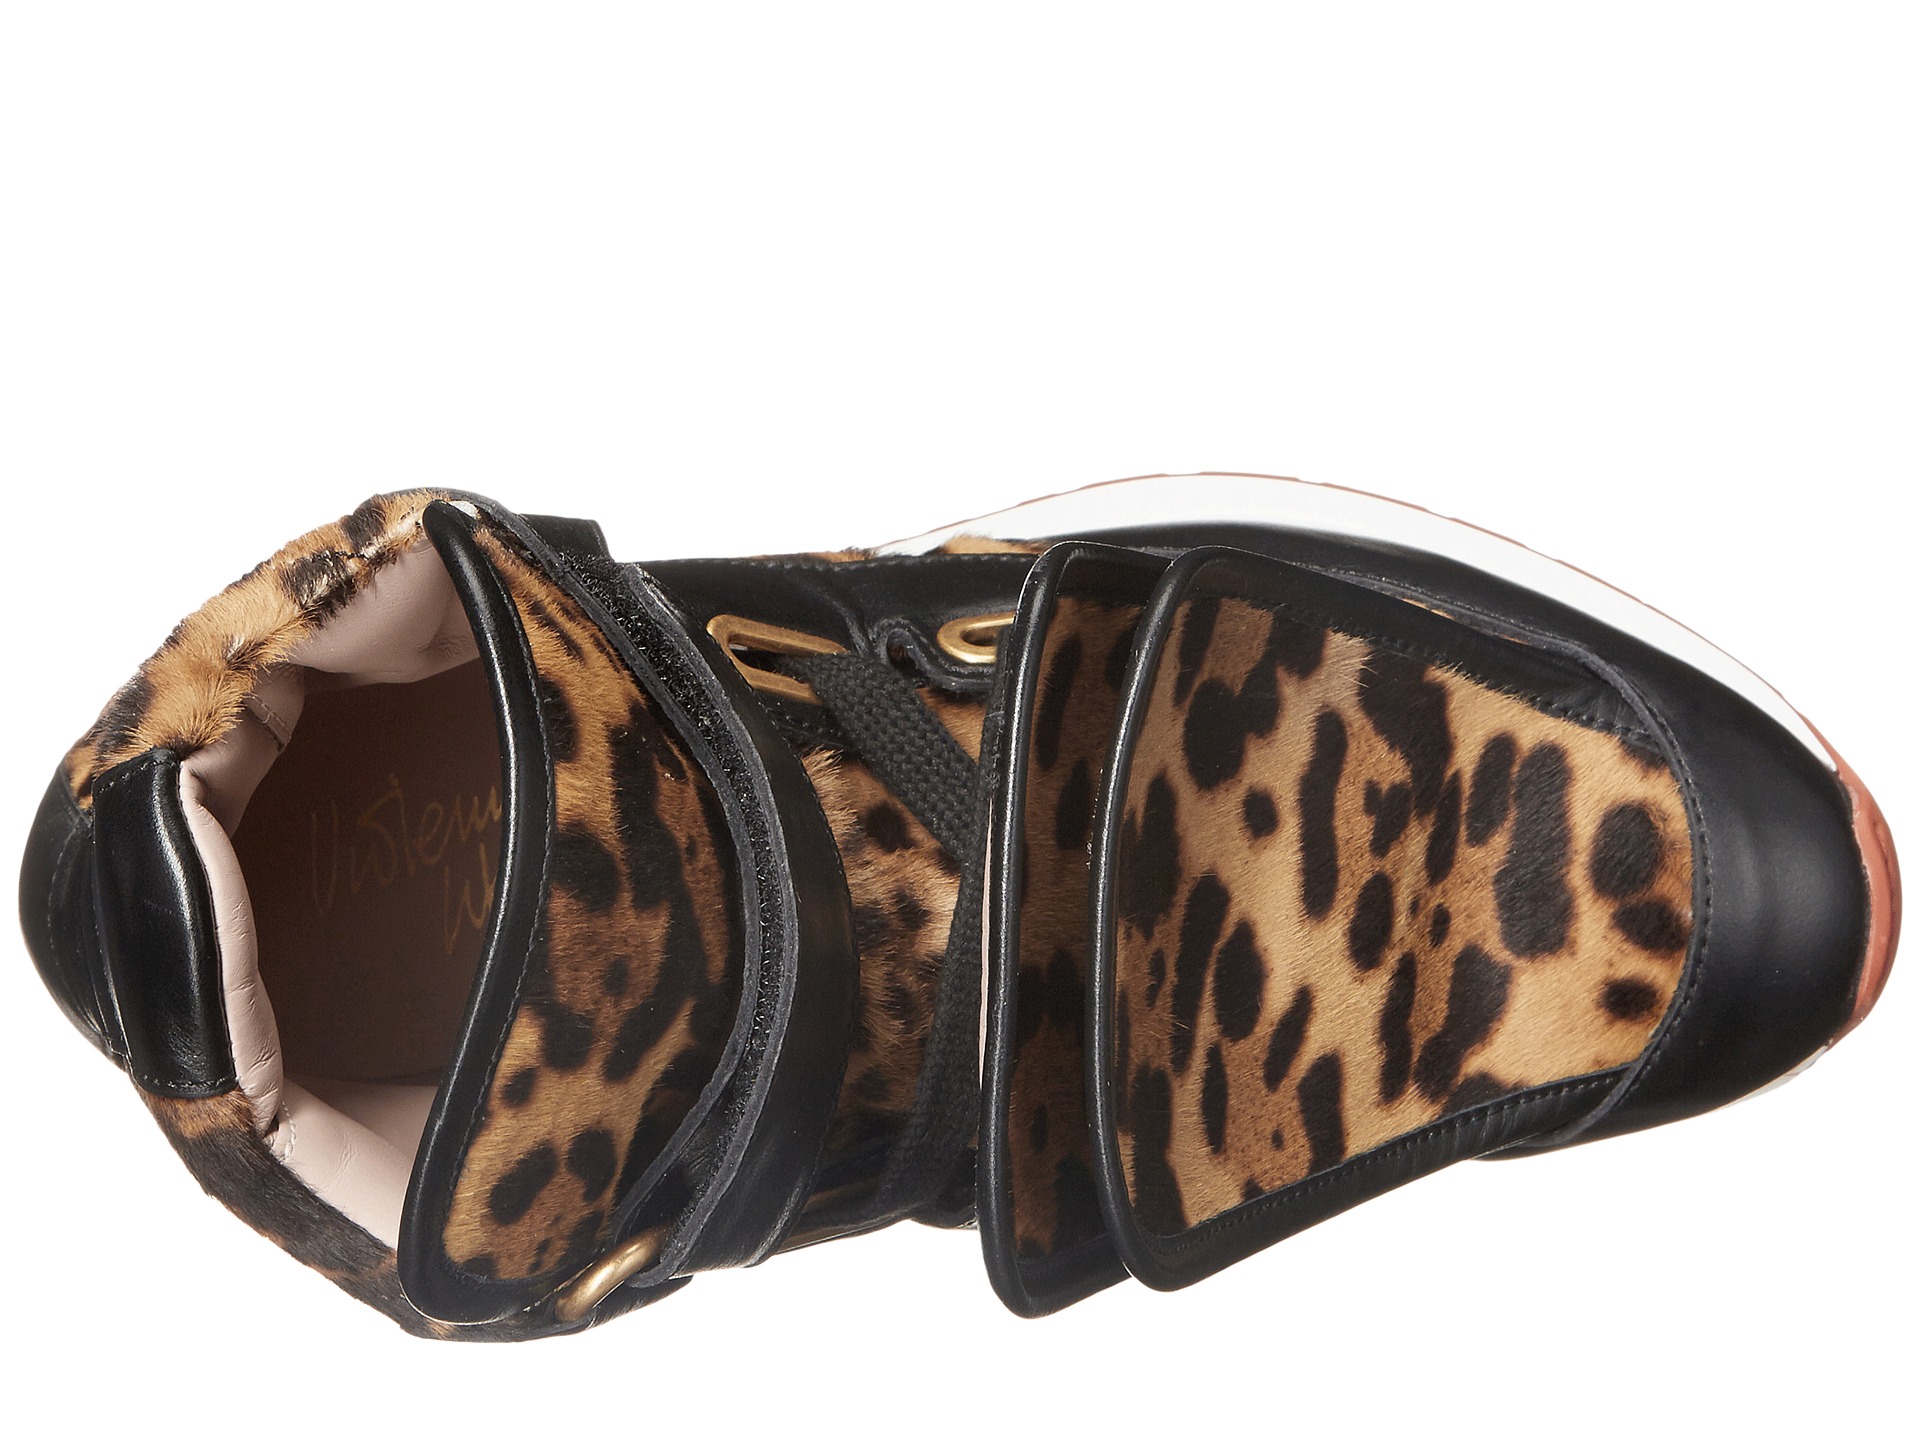 Vivienne Westwood 3-Tongue Trainer Leopard - Zappos.com Free Shipping ...